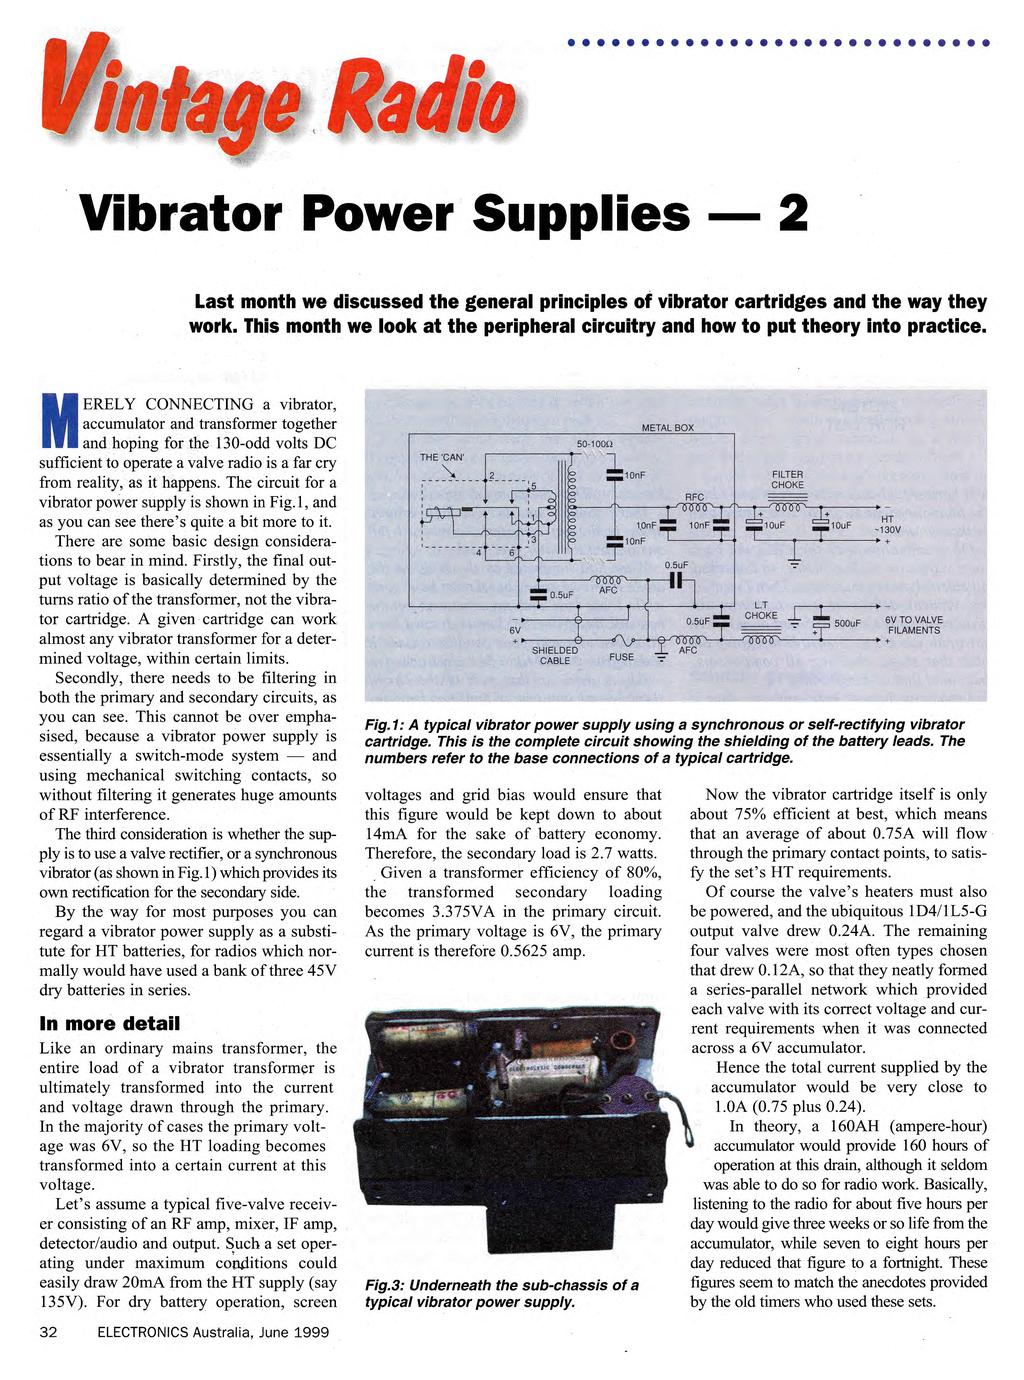 * * 0 4 0 0 @ * 0 0 0 * 0 Vibrator Power Supplies Last month we discussed the general principles of vibrator cartridges and the way they work.